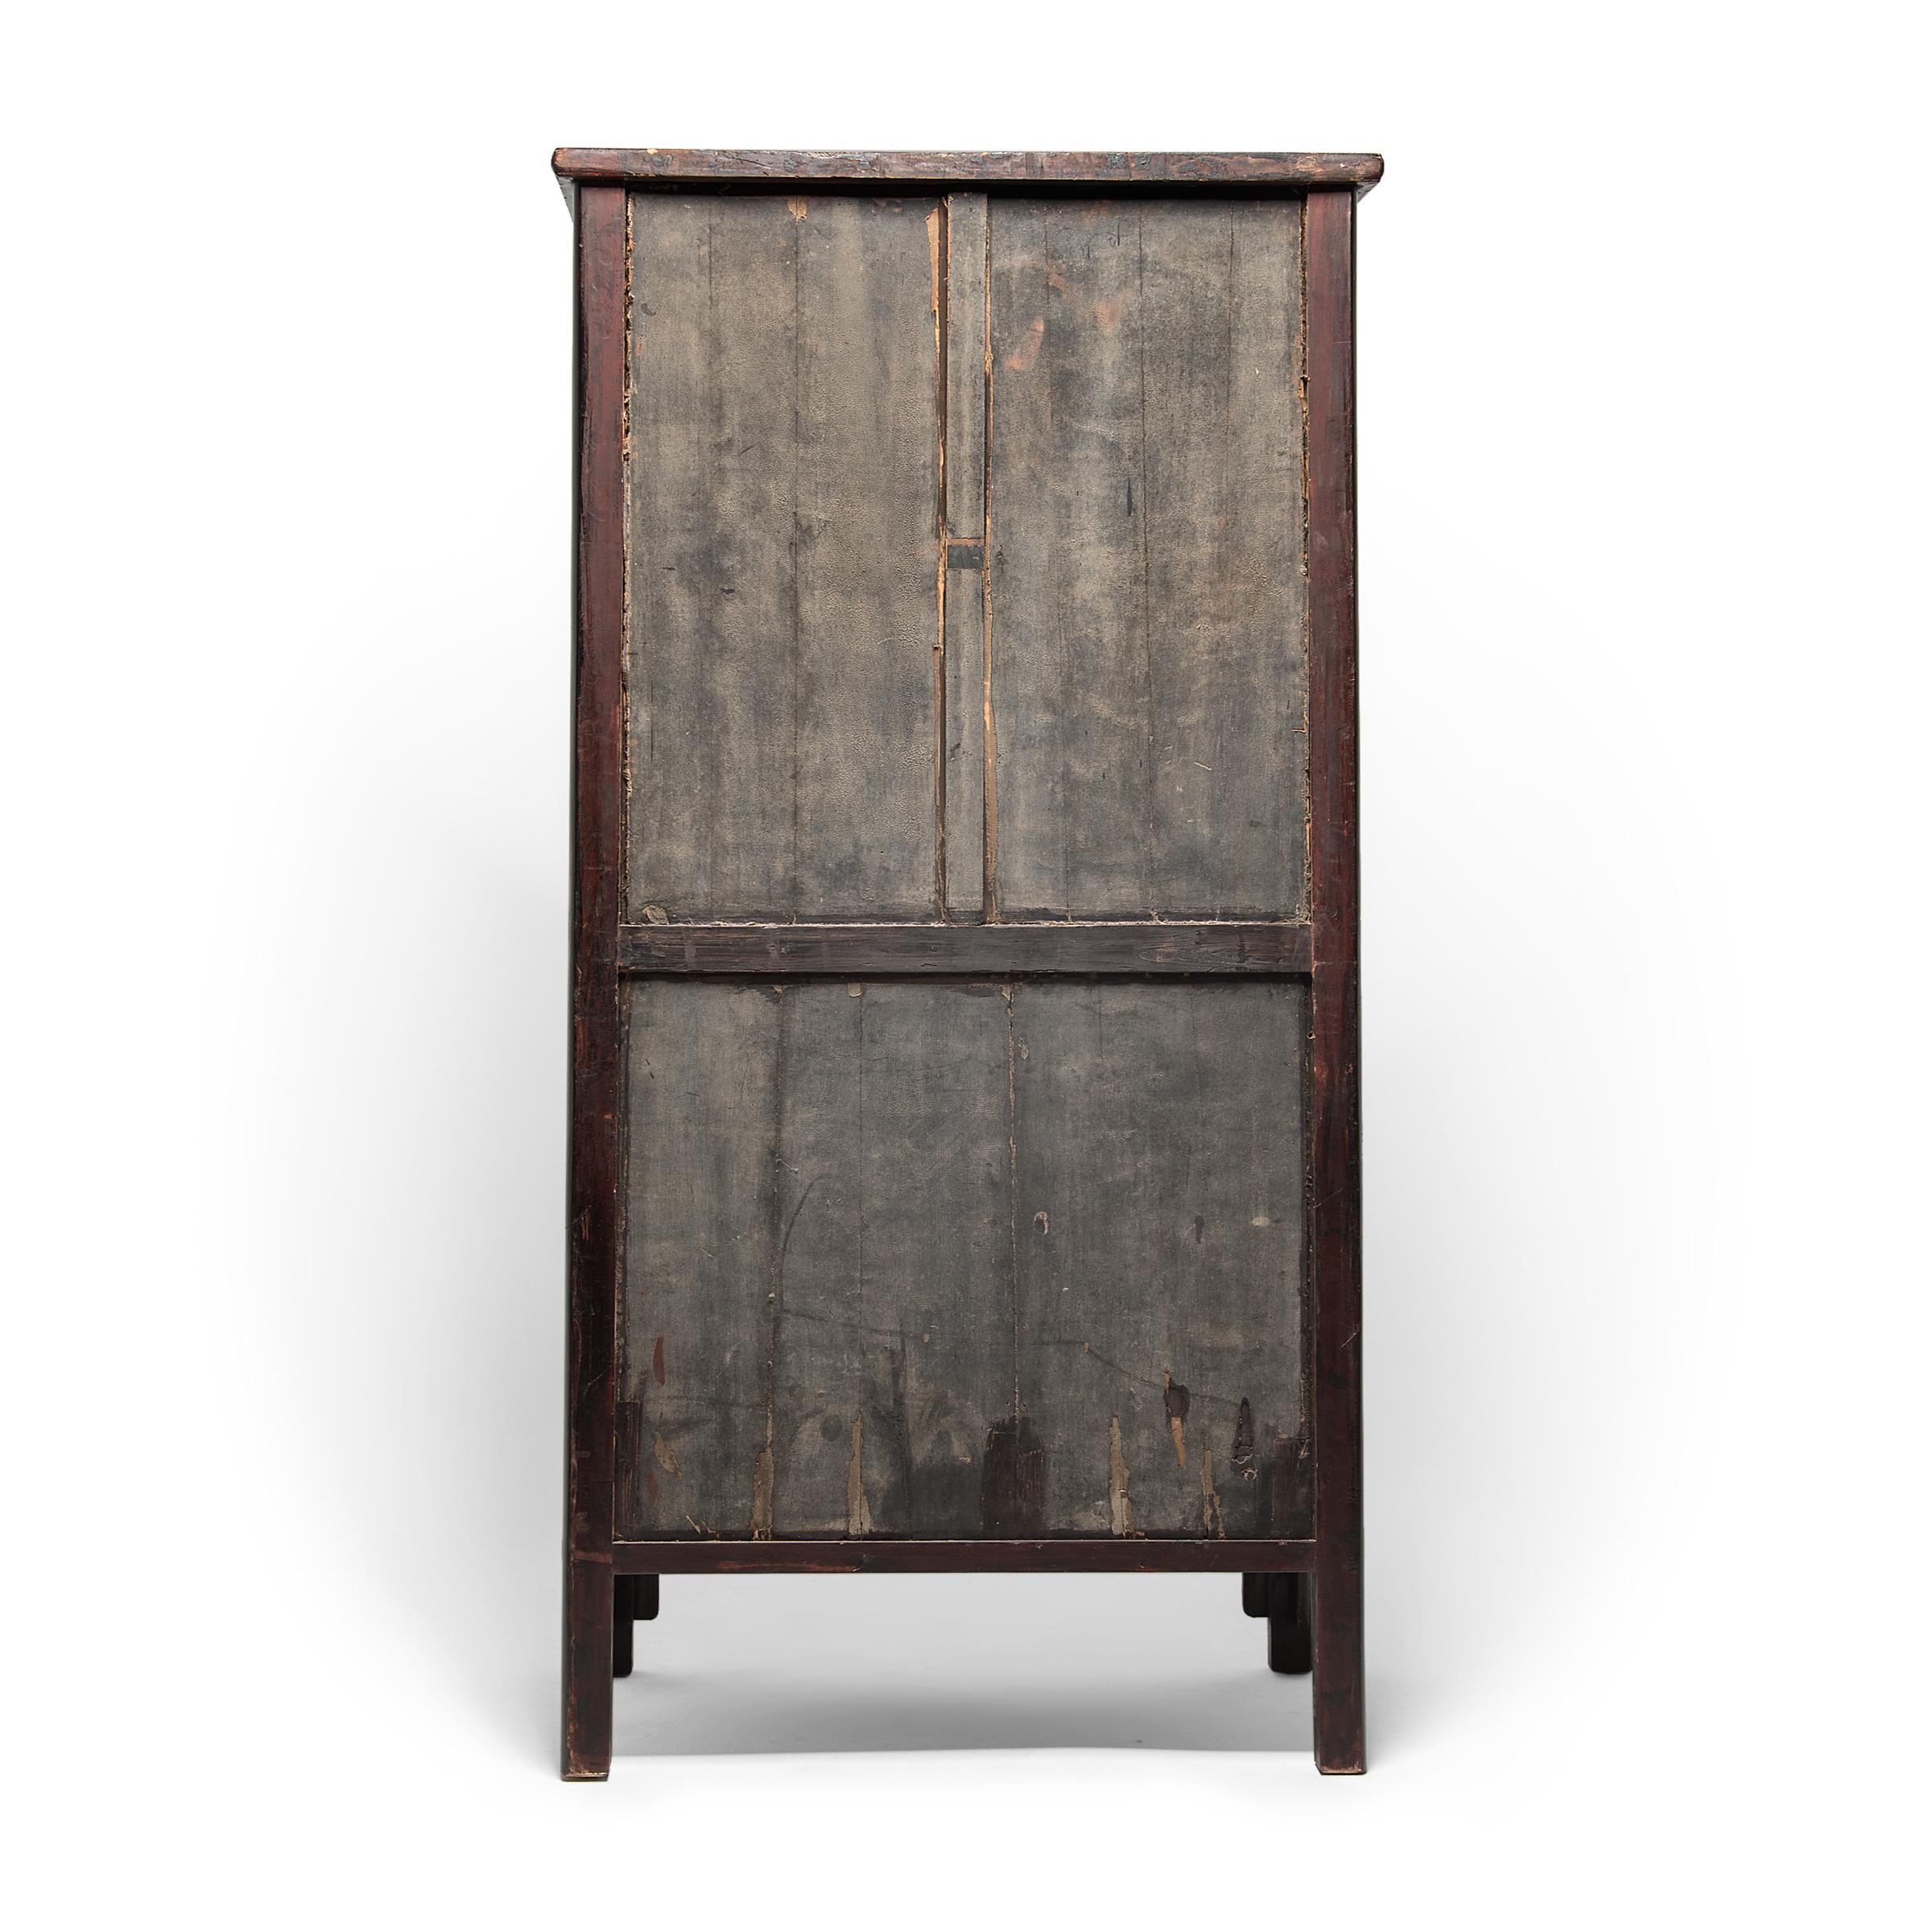 Qing Chinese Diamond Lattice Display Cabinet, c. 1850 For Sale